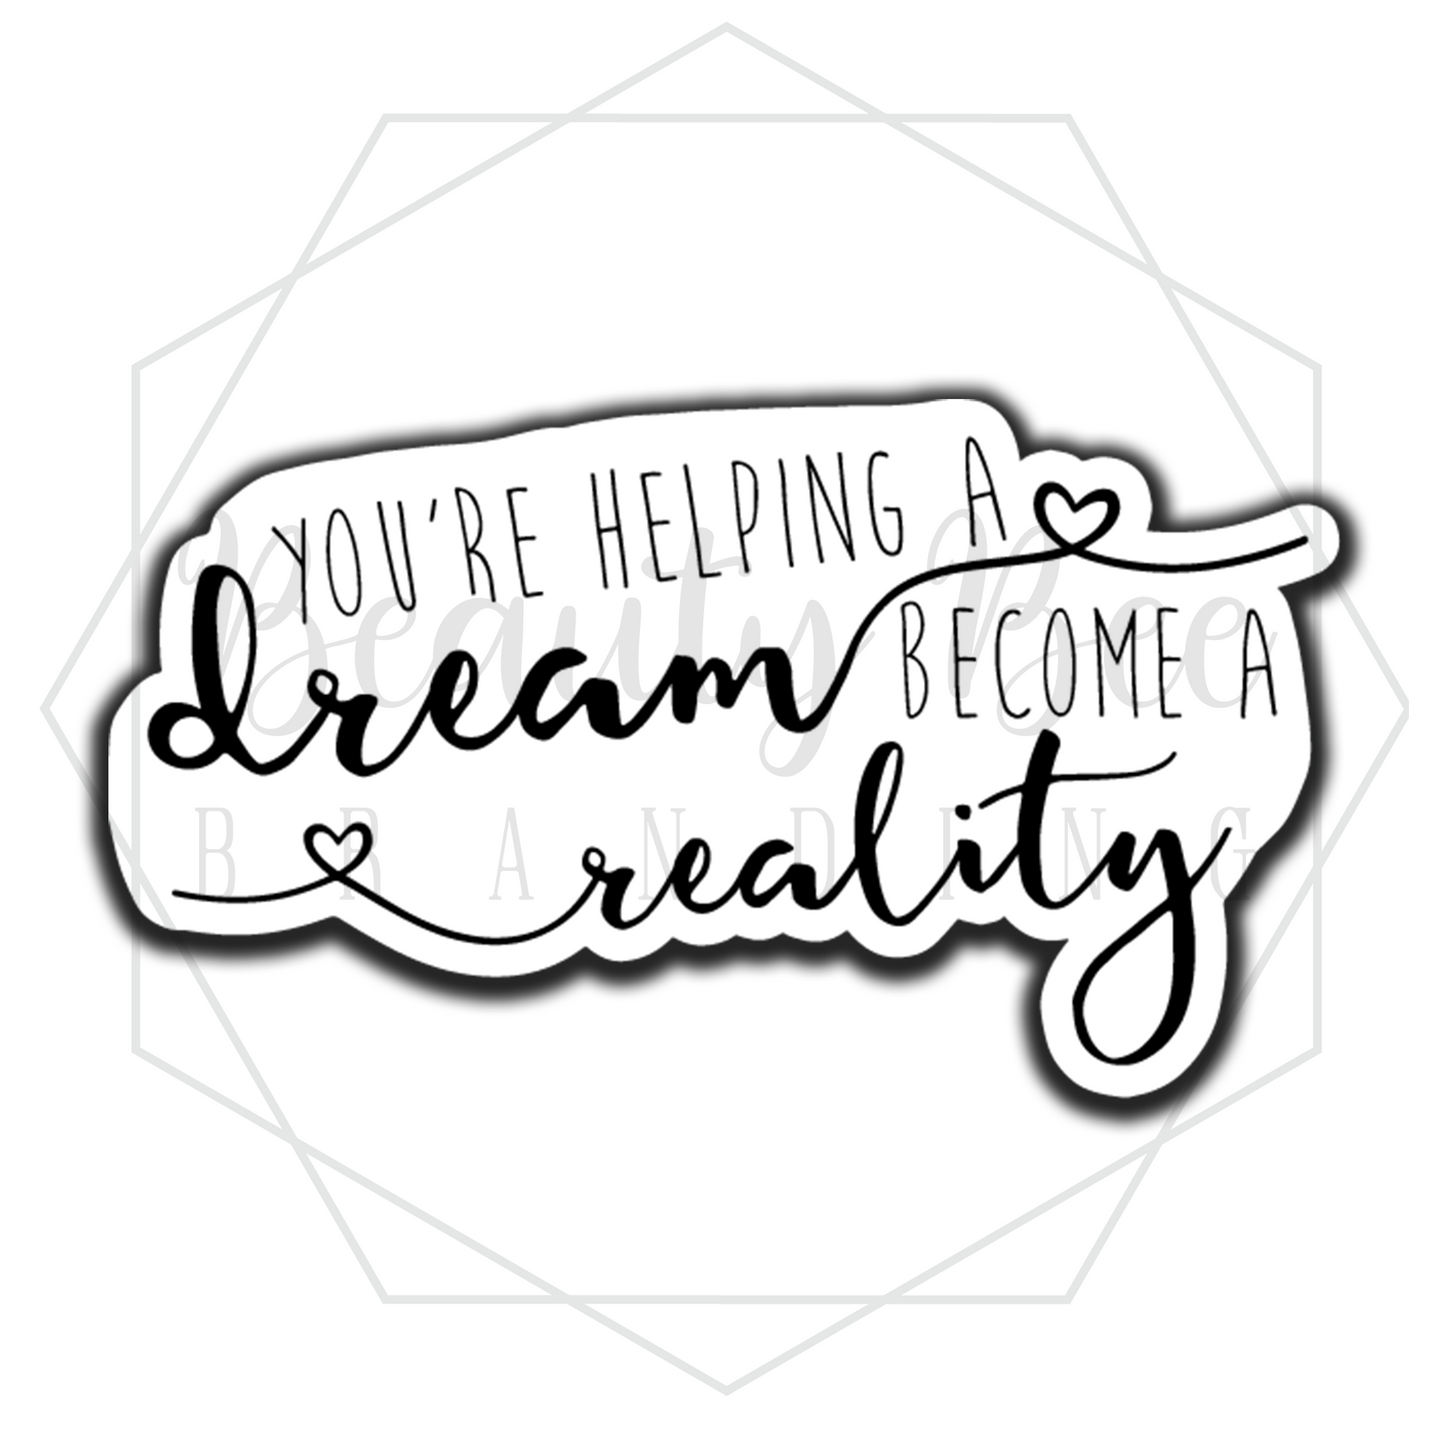 You're Helping a Dream Become a Reality Sticker Sheet